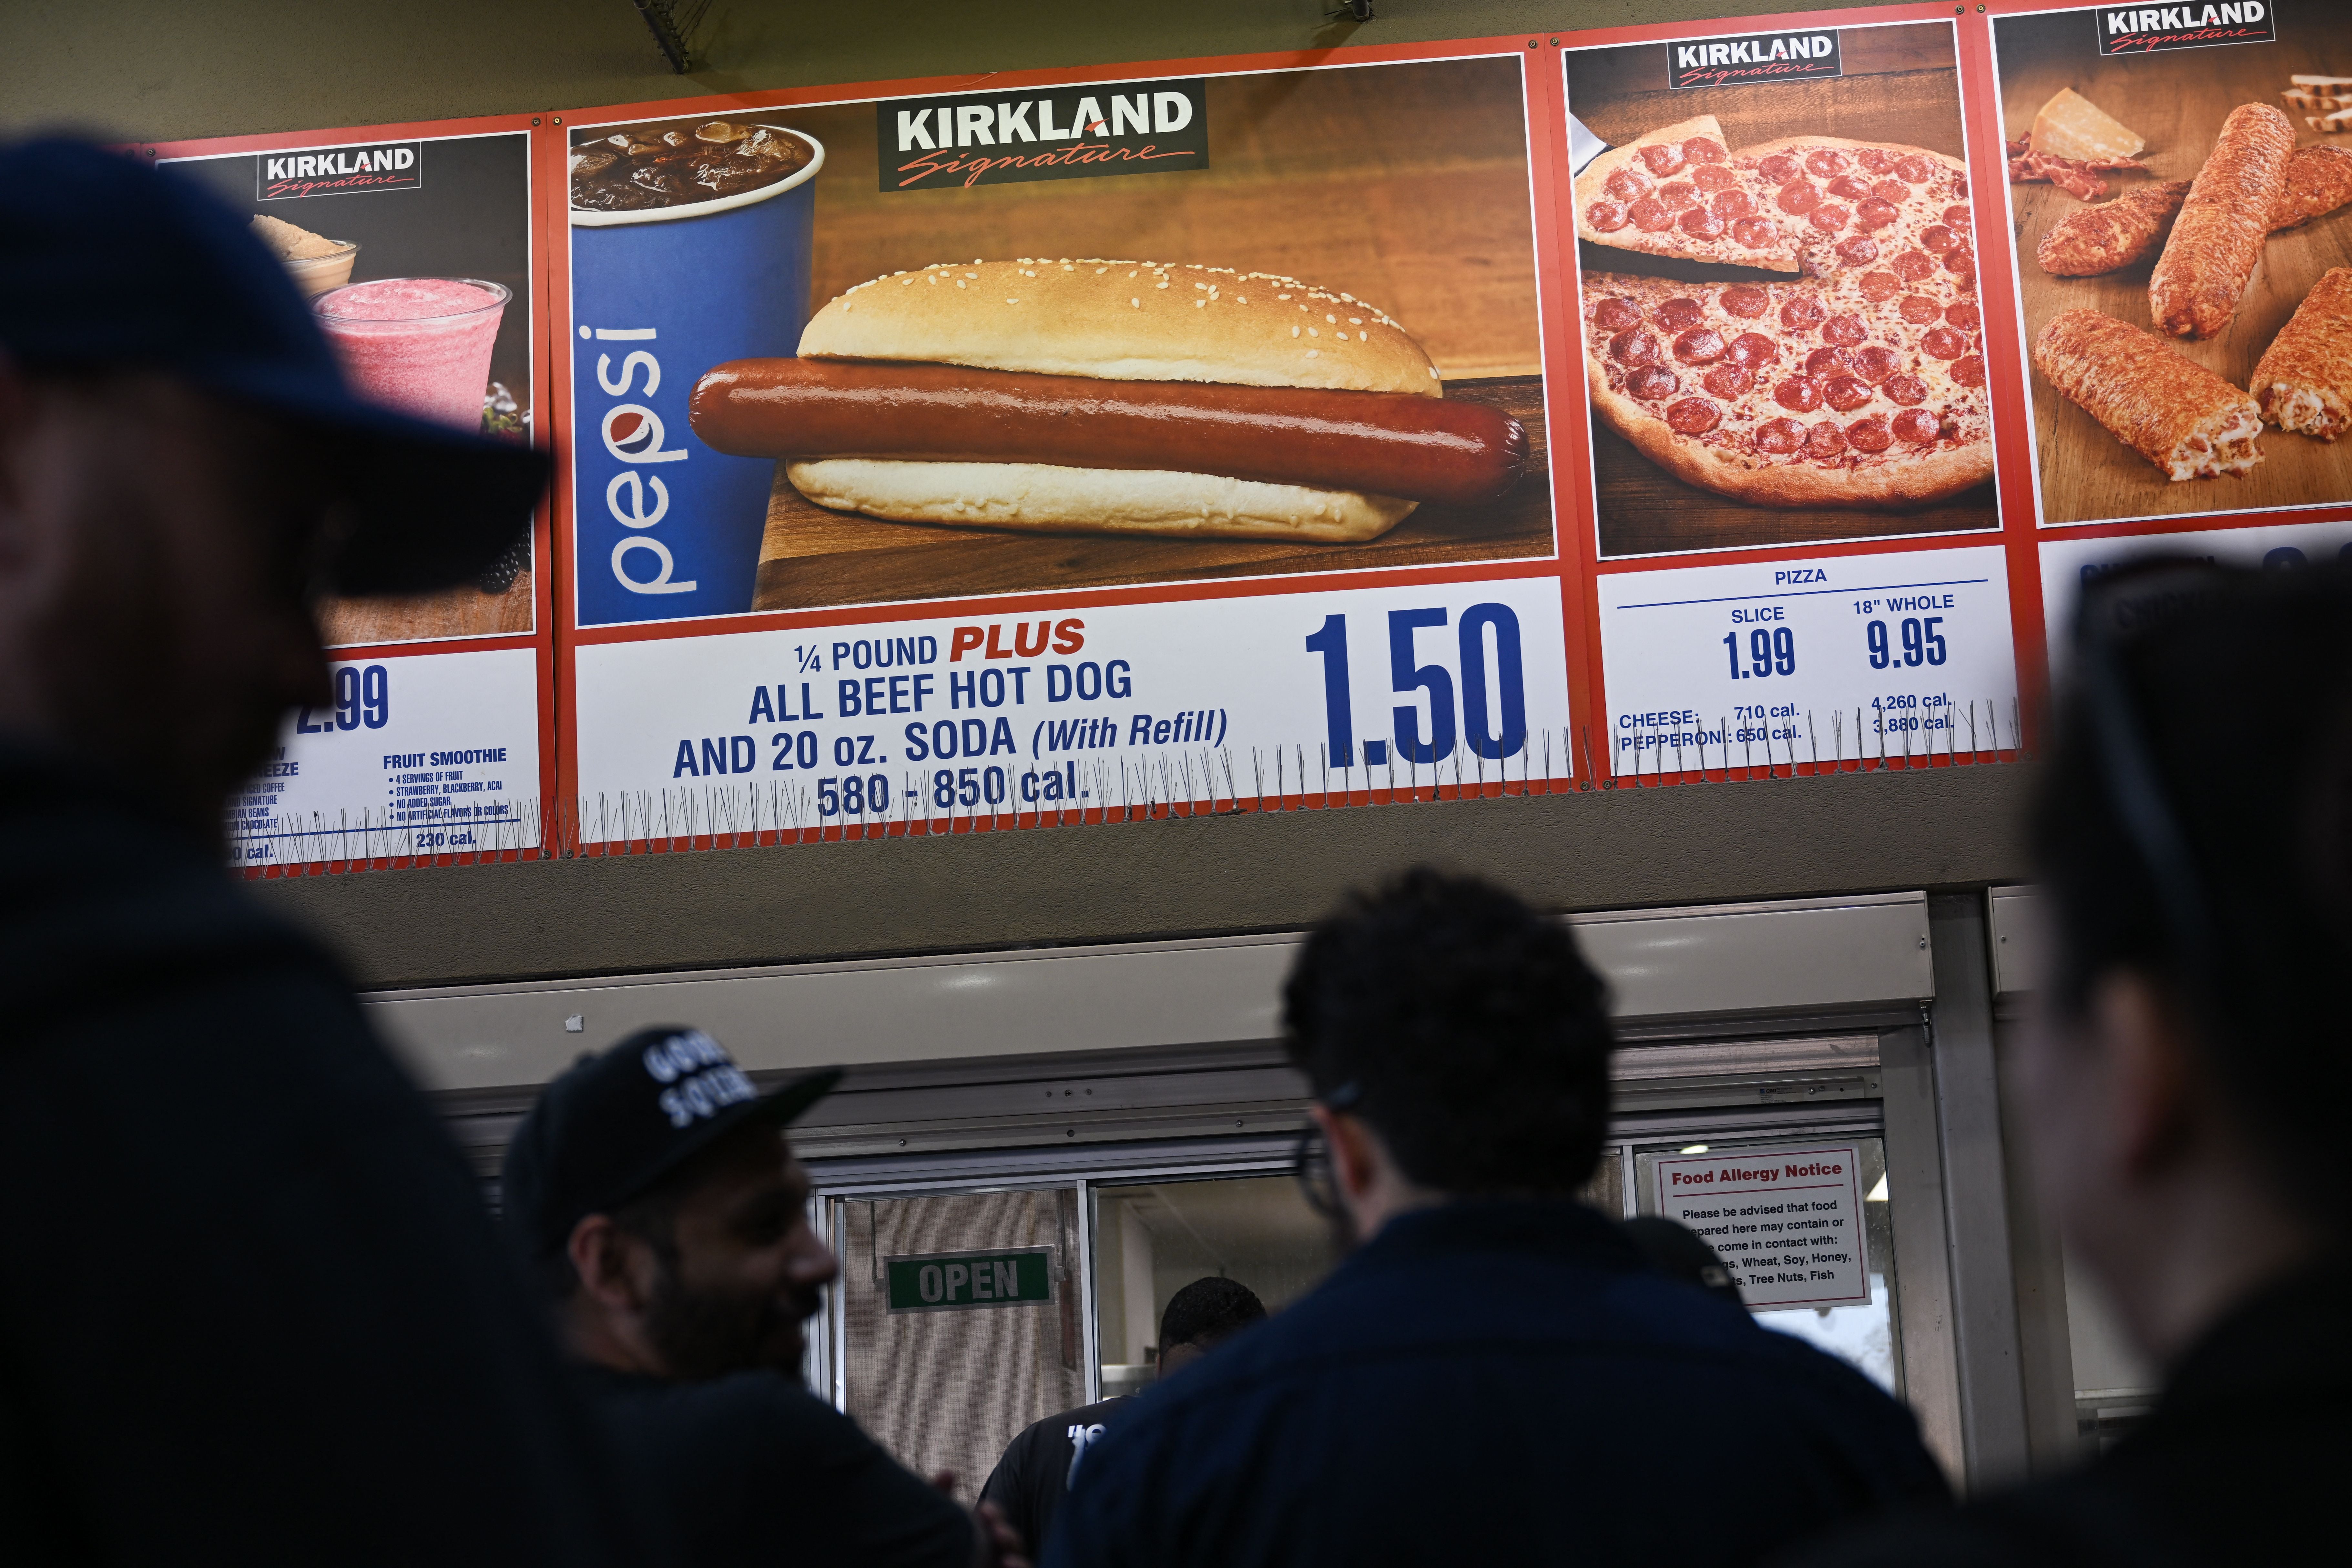 Customers wait in line to order below signage for the Costco Kirkland Signature $1.50 hot dog and soda combo, which has maintained the same price since 1985. The company’s new Chief Financial Officer, Gary Millerchip, said he does not intend to change the price